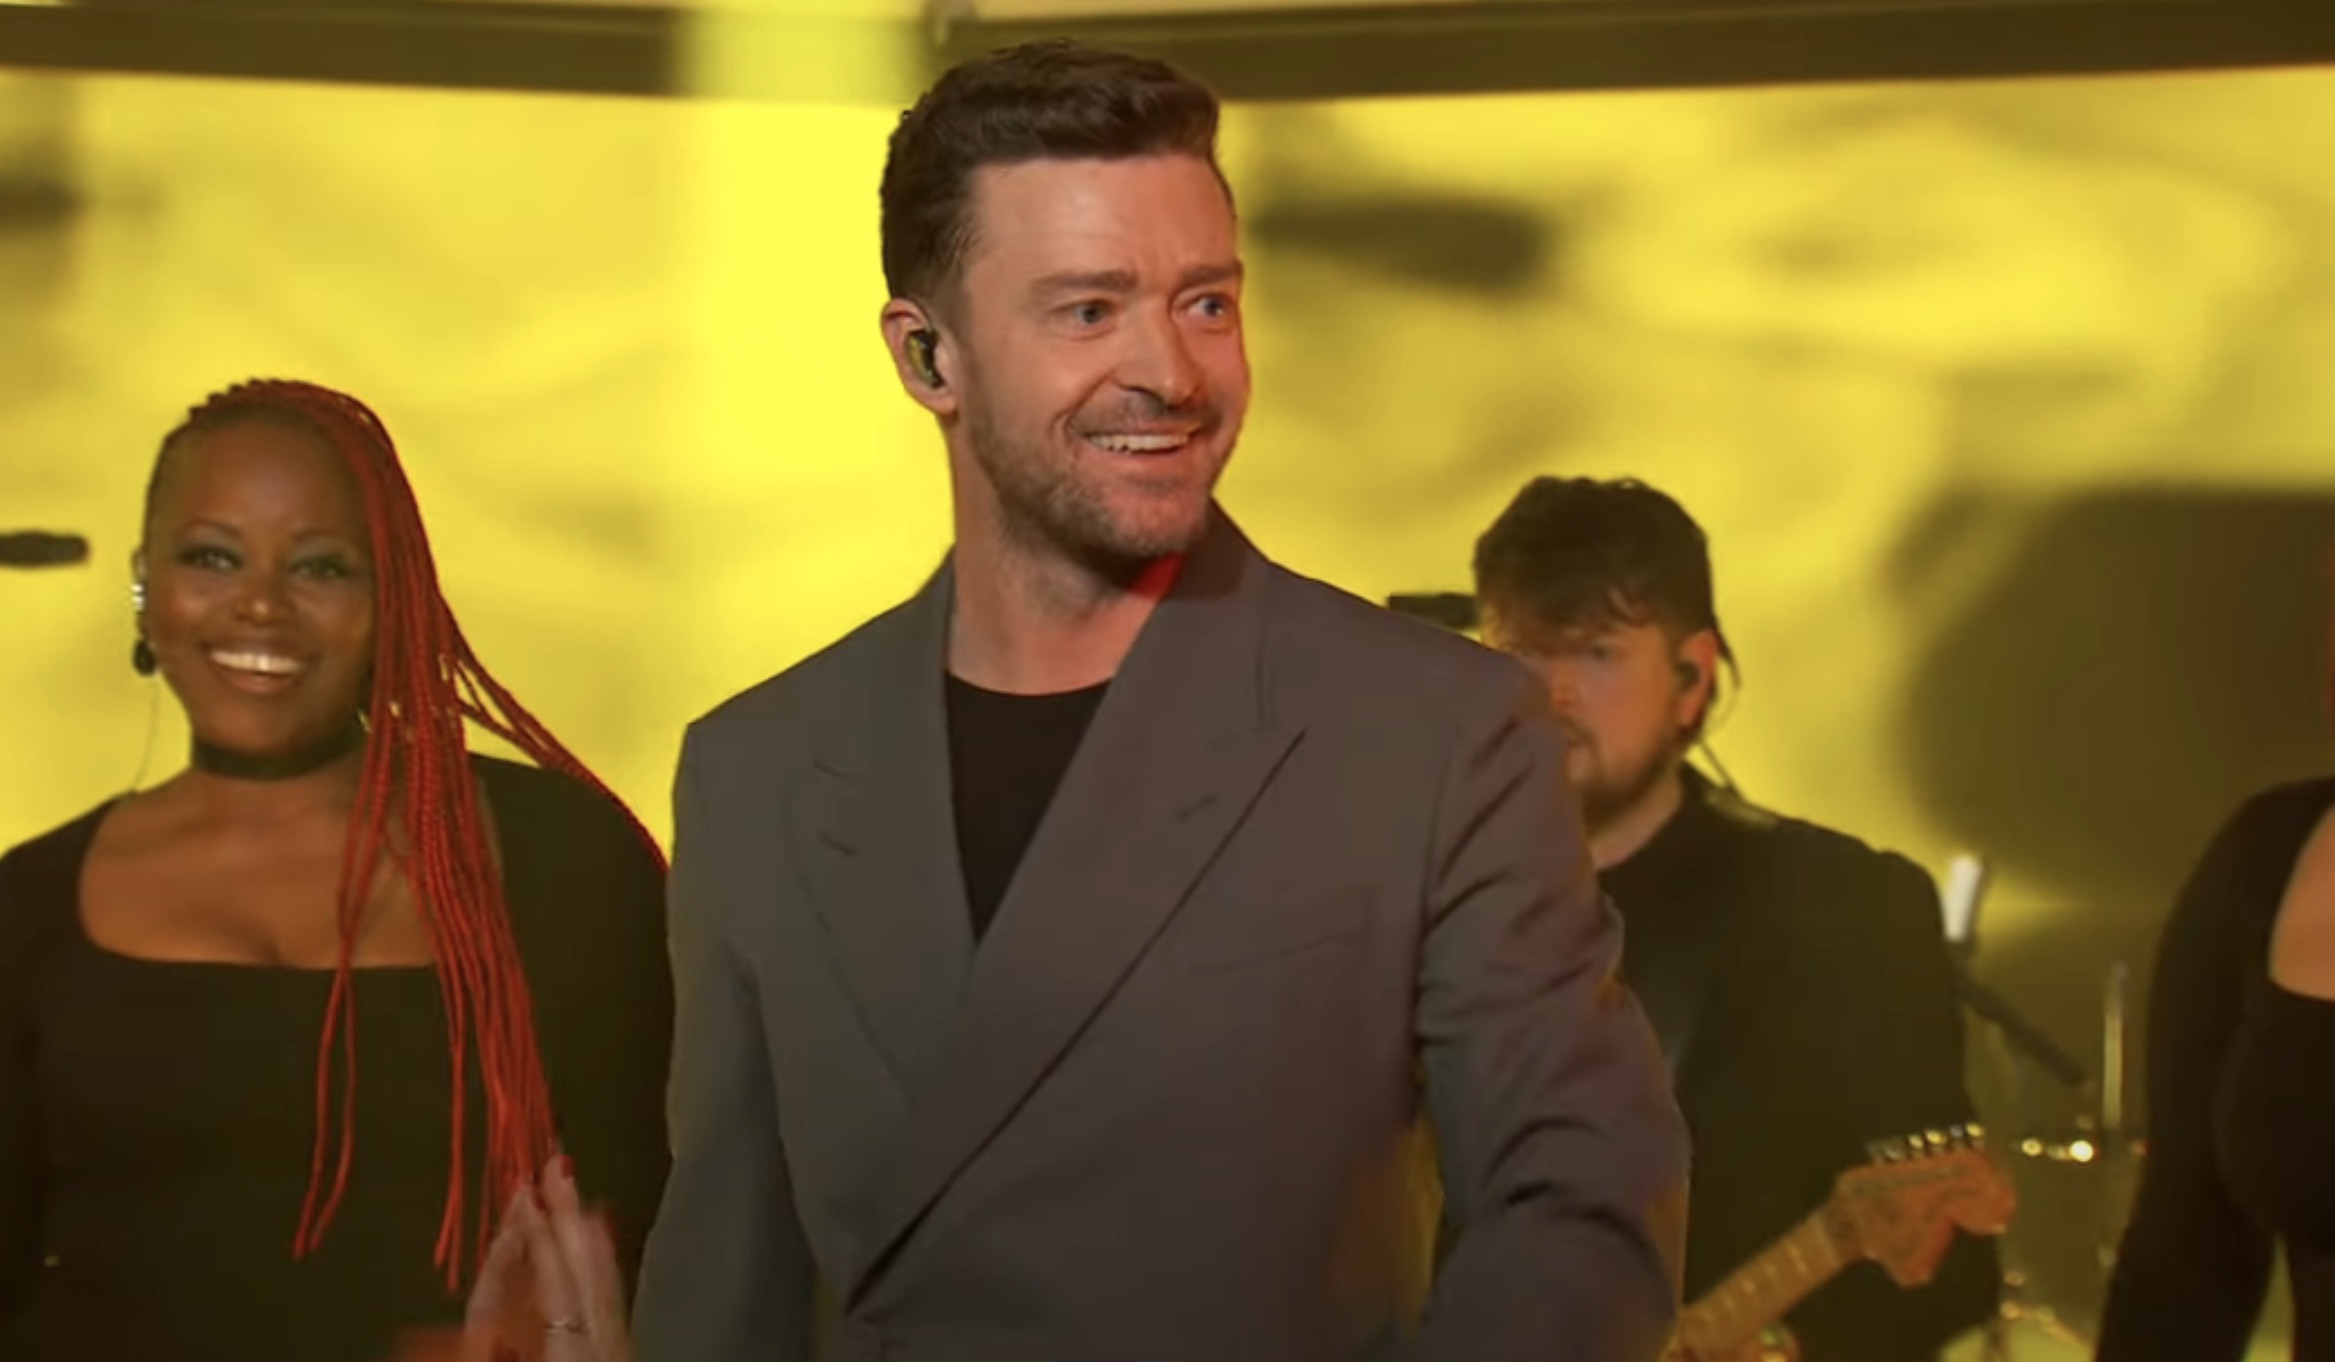 Watch: Justin Timberlake Performs New Single ‘No Angels’ on ‘Jimmy Kimmel Live’